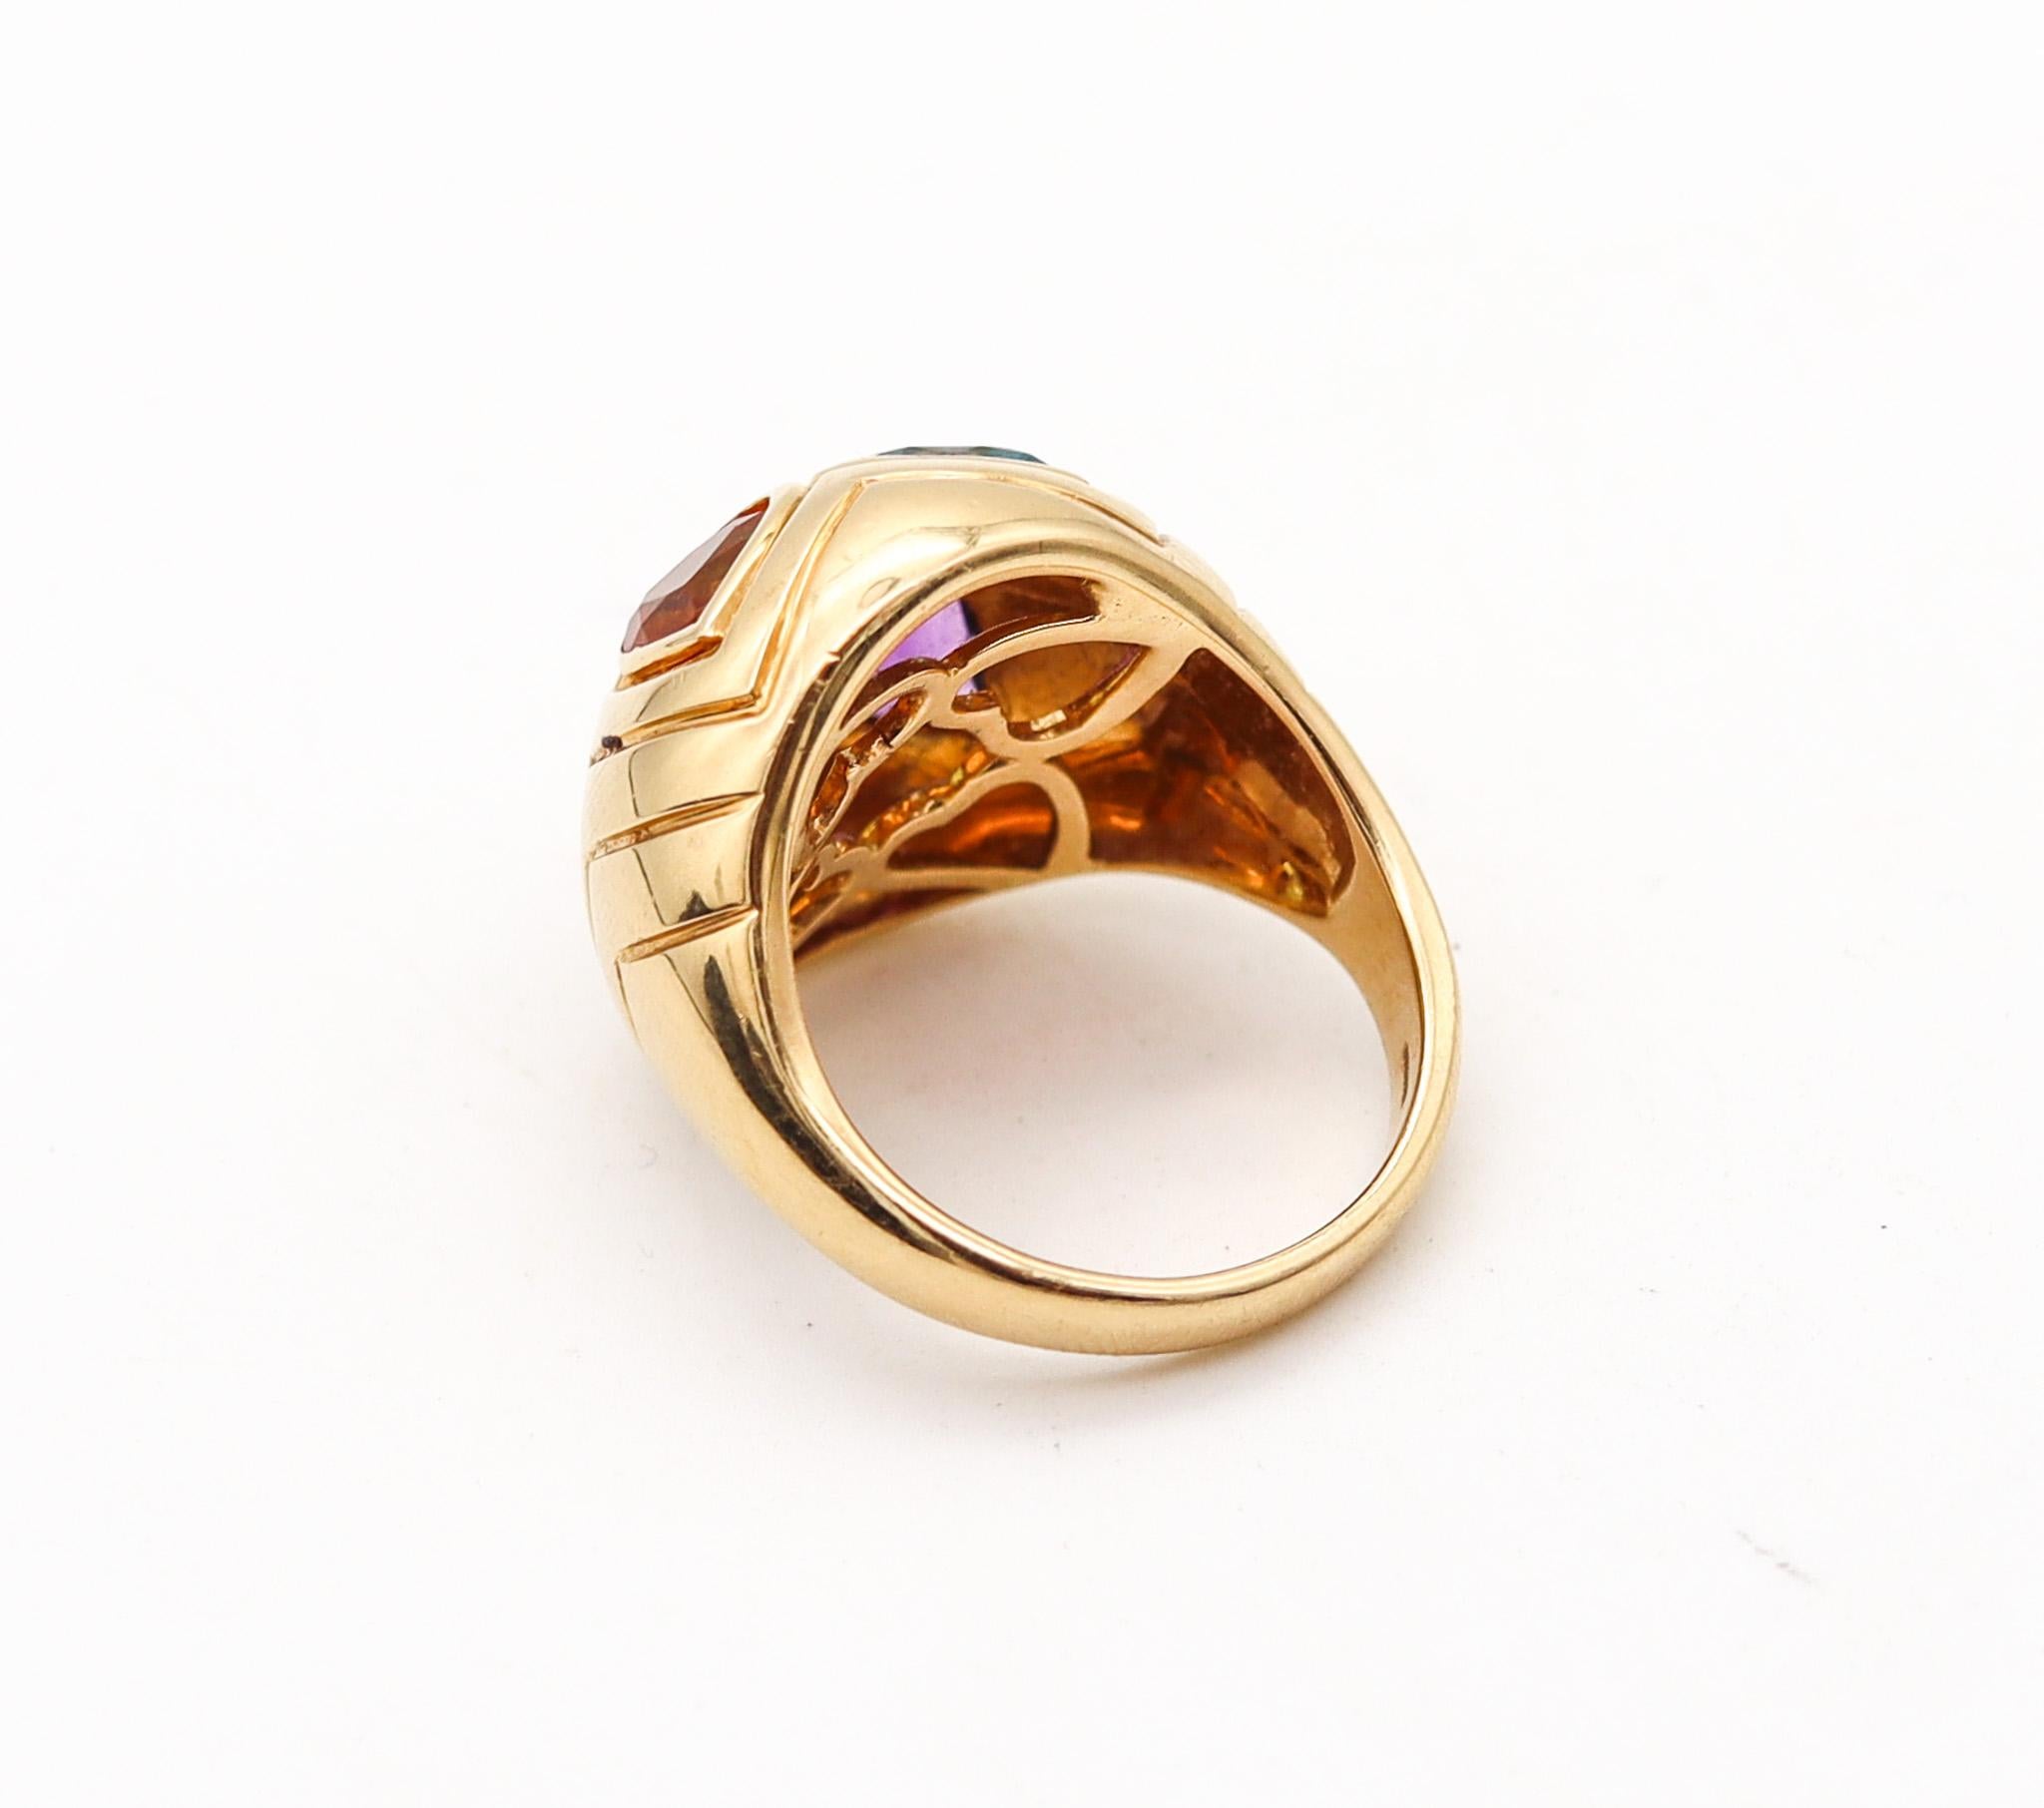 Brilliant Cut Bvlgari Roma Bombe Cocktail Ring In 18Kt Gold With 6.10 Ctw In Color Gemstones For Sale